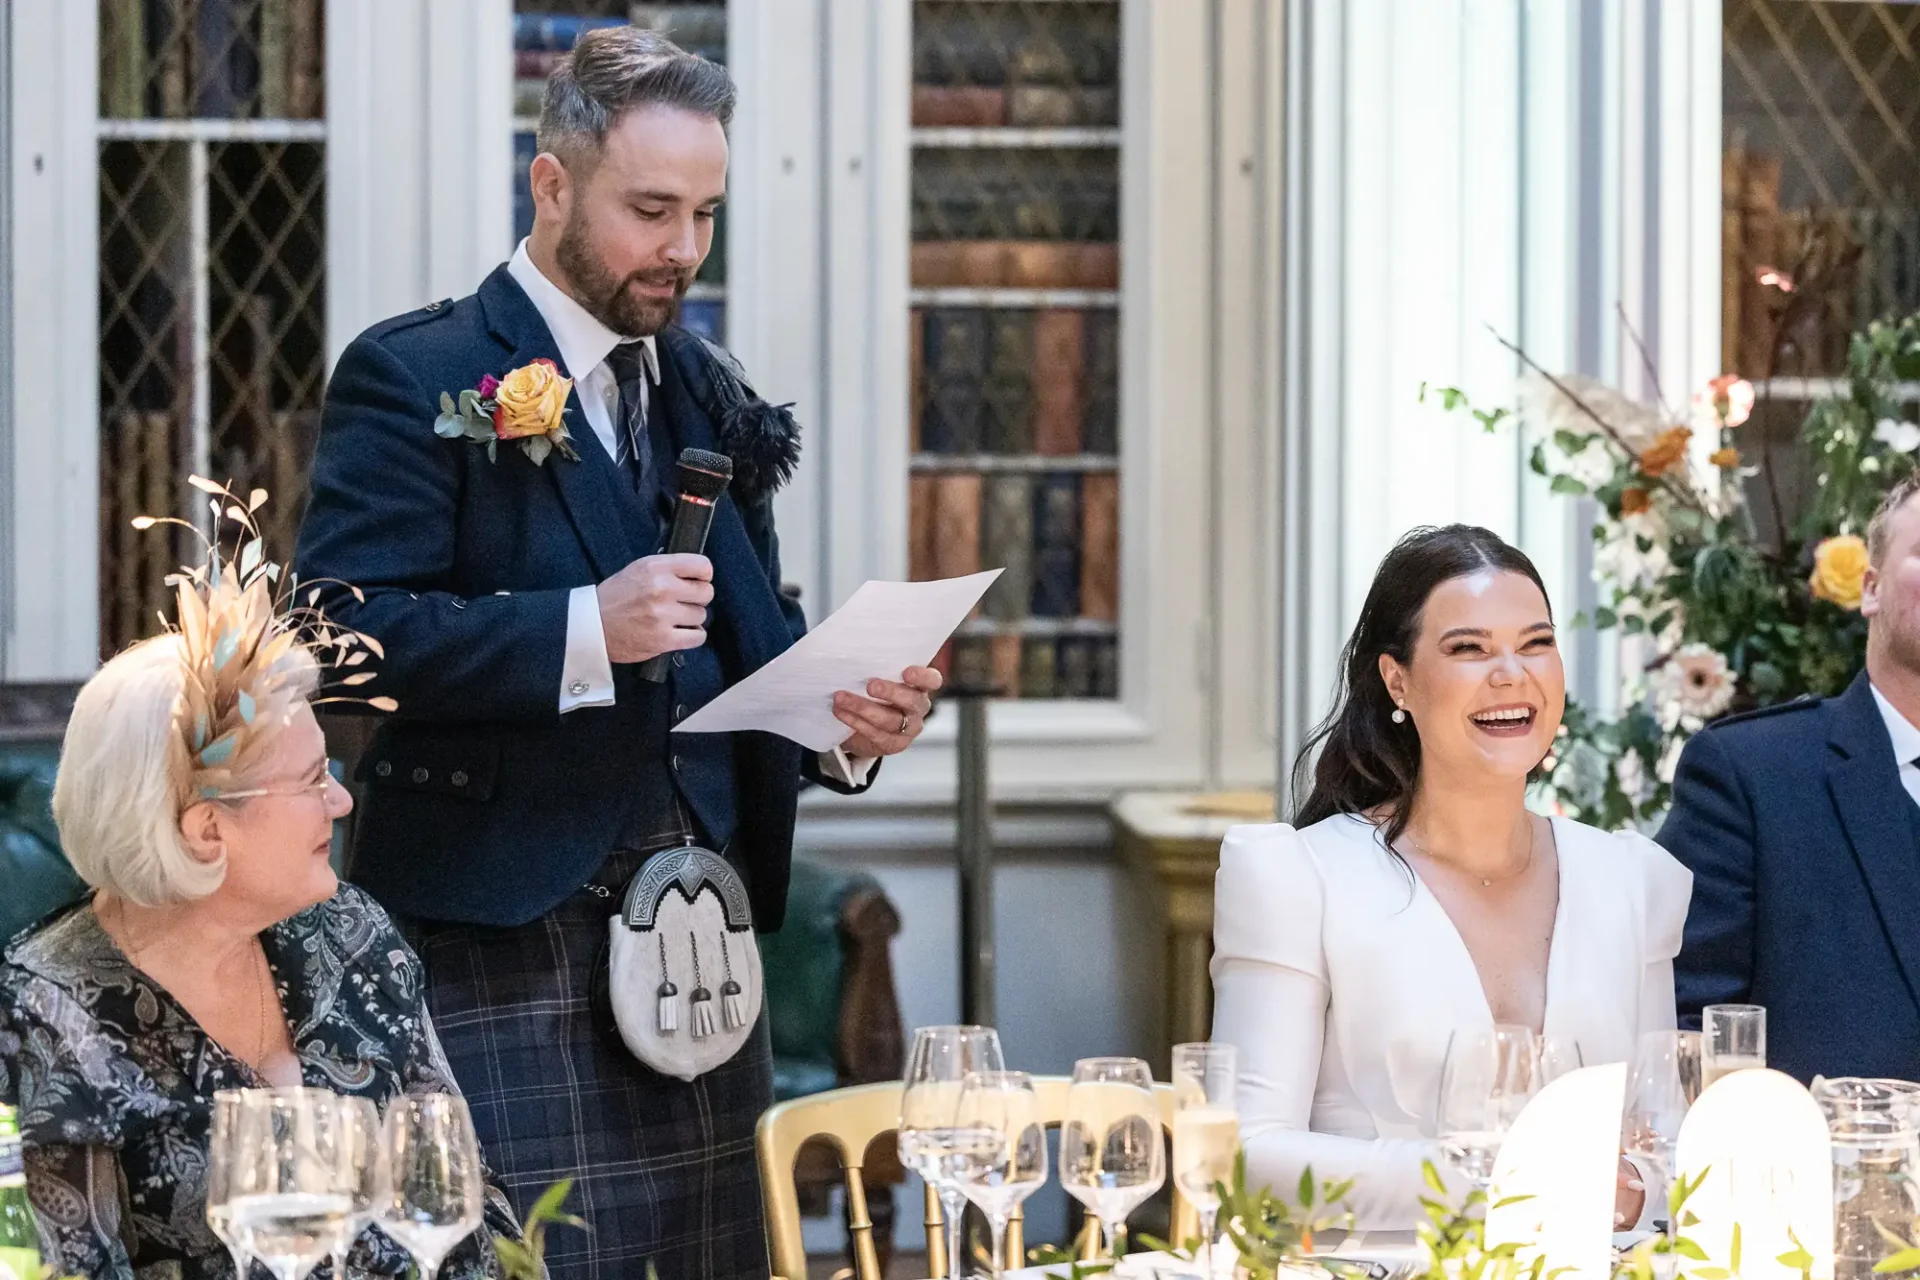 A man in a kilt delivers a speech at a wedding, holding a paper, as a bride sitting next to an older woman laughs joyfully at a decorated table.